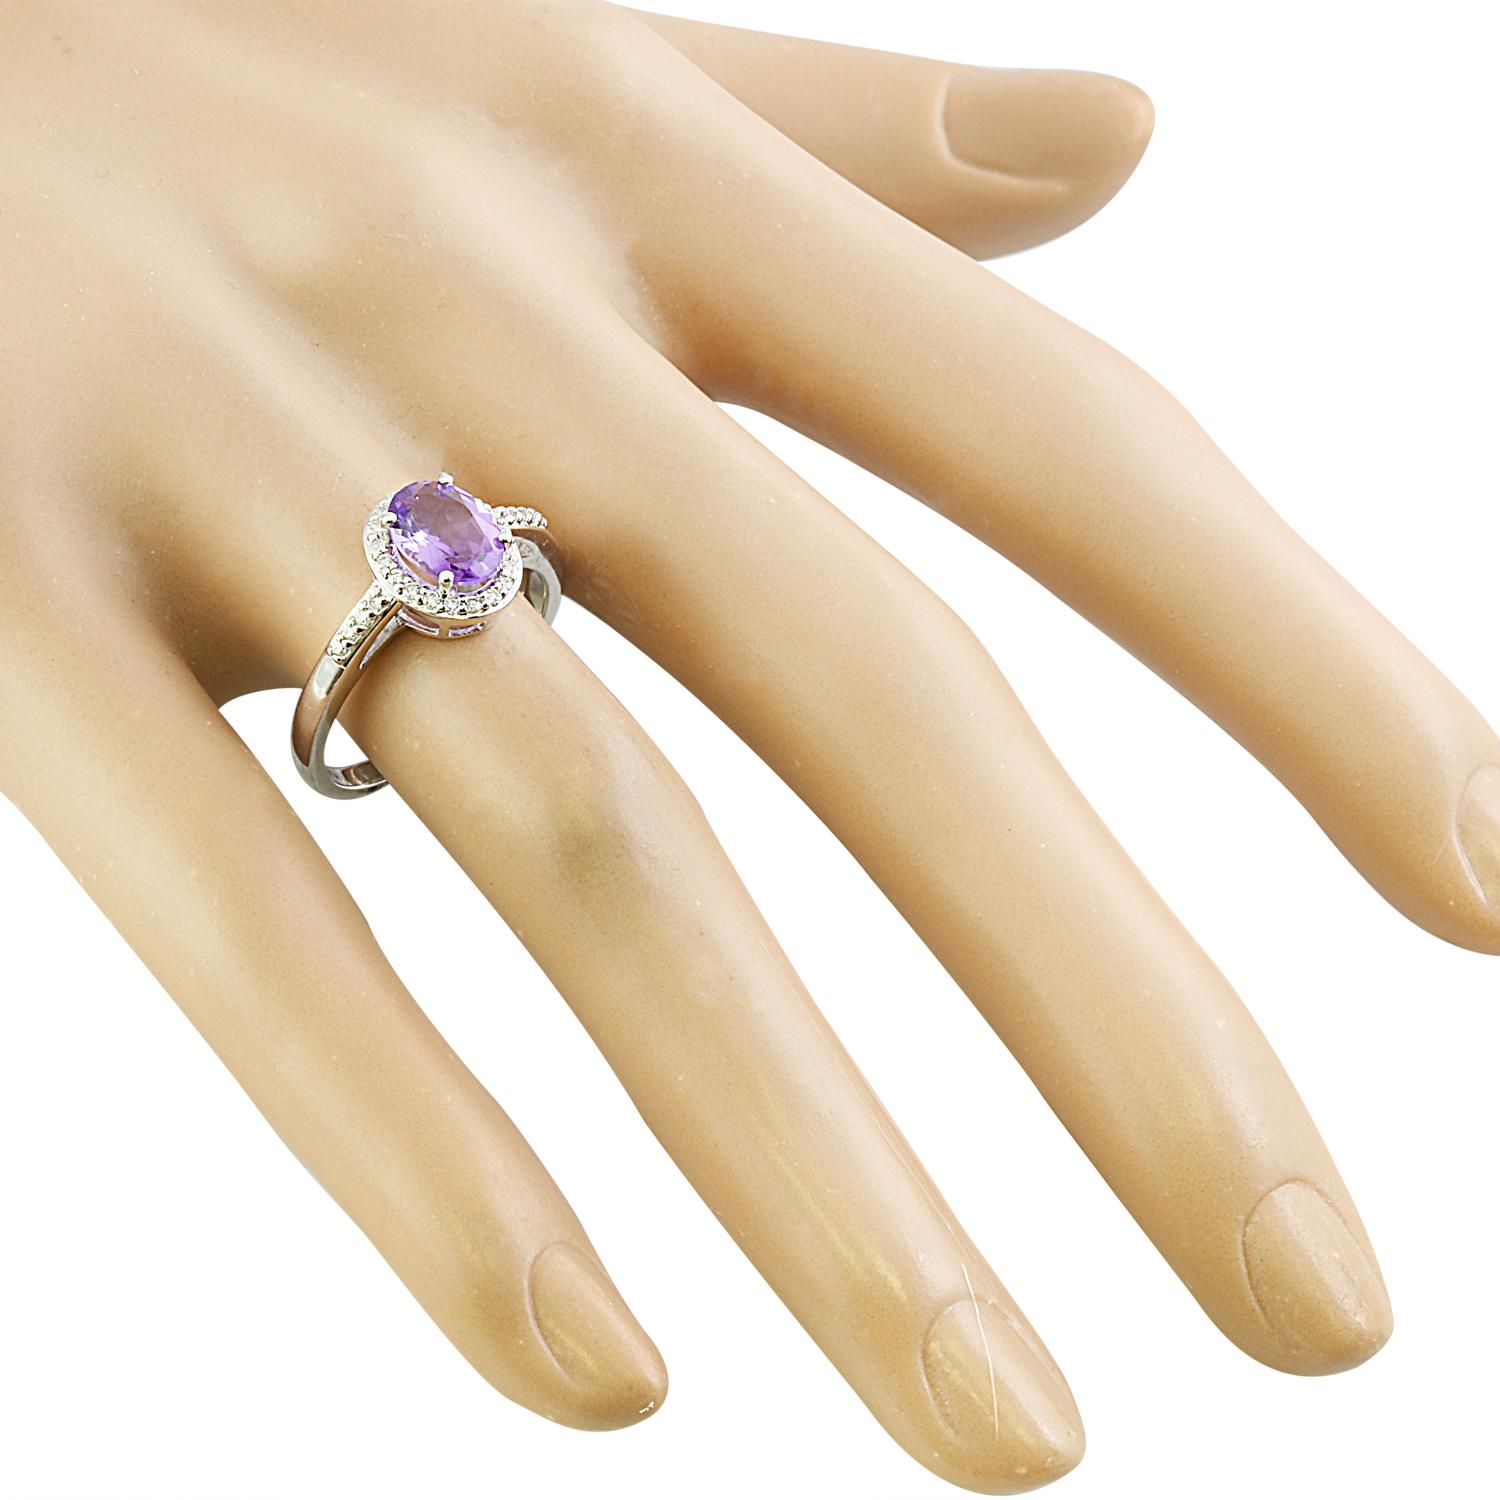 Exquisite Natural Amethyst Diamond Ring in 14K Solid White Gold In New Condition For Sale In Los Angeles, CA